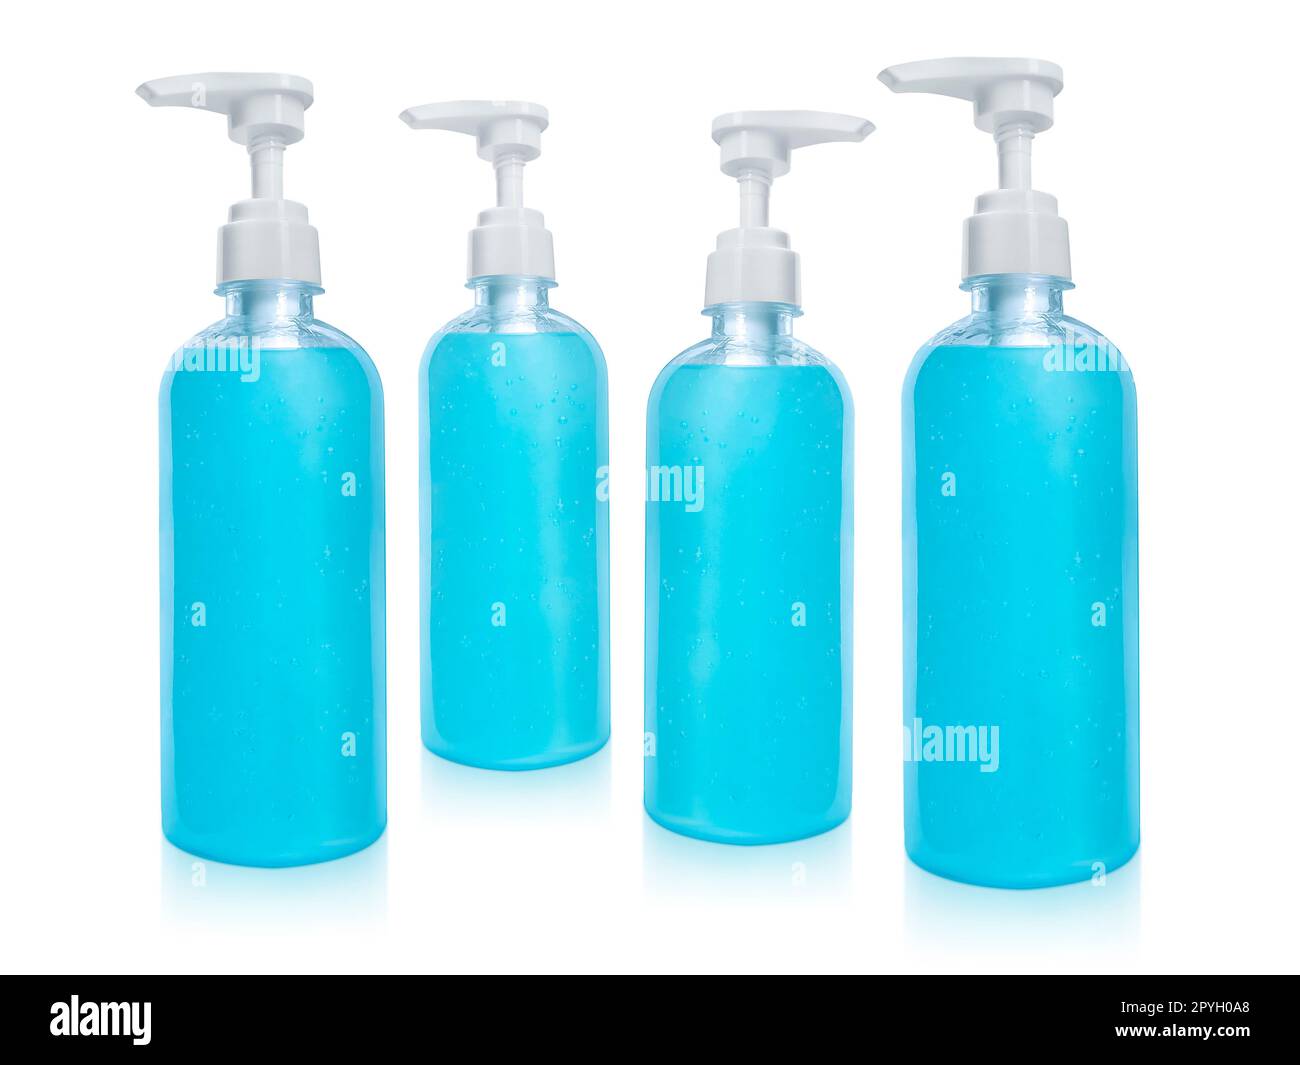 Alcohol gel sanitizer hand gel cleaners for anti Bacteria and virus on White Background, People using alcohol gel to wash hands to prevent COVID-19 virus Stock Photo